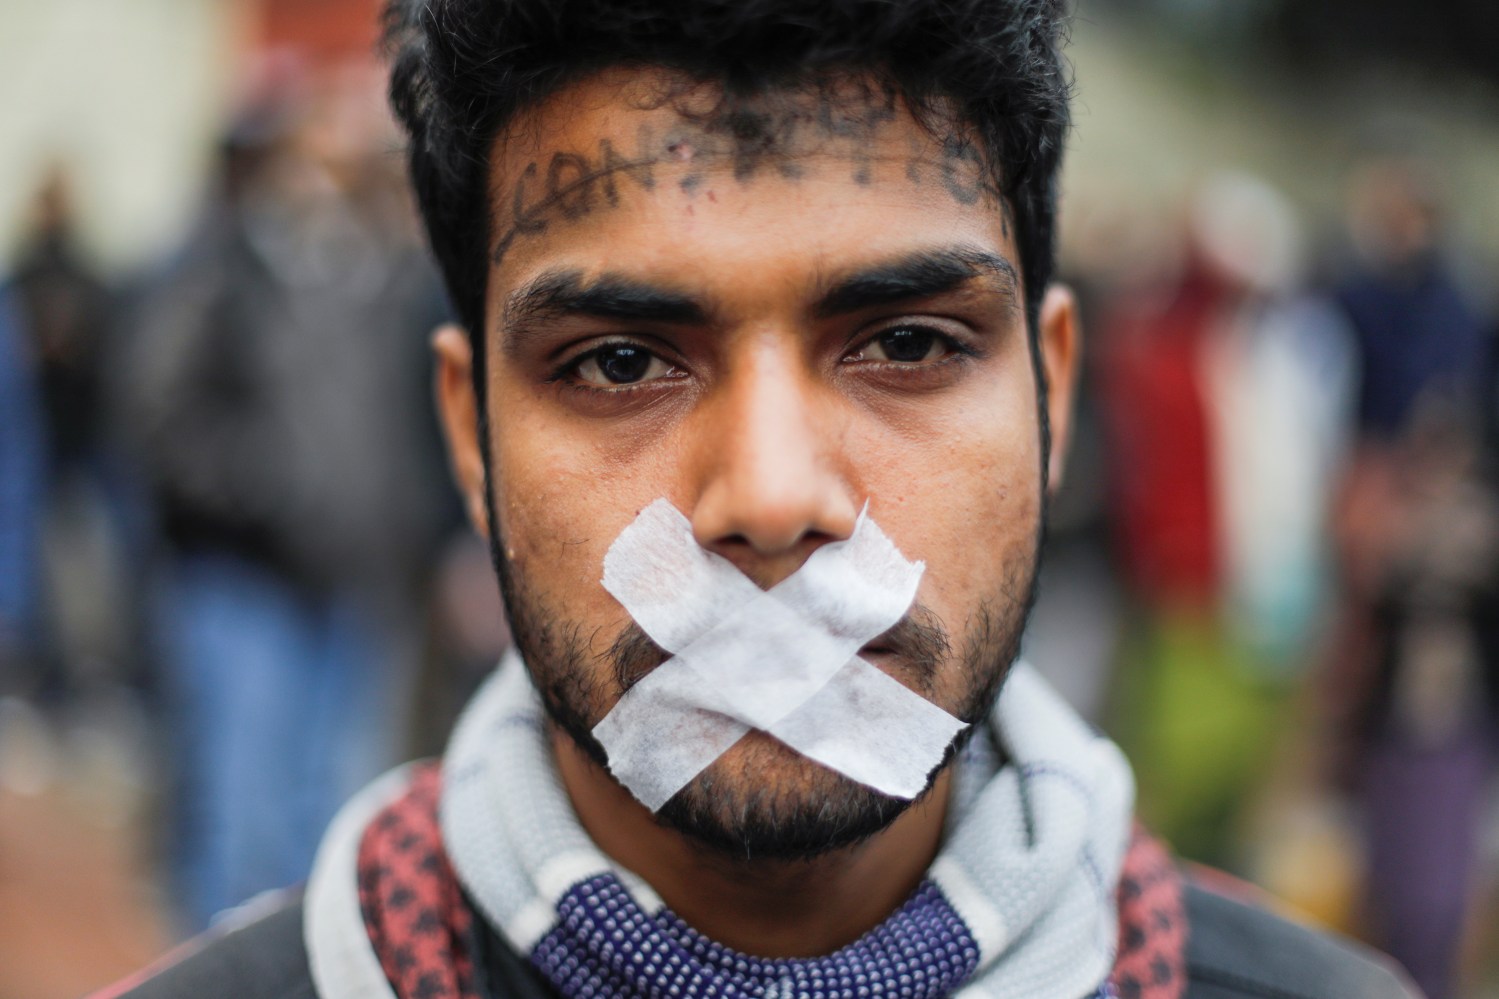 A protester with tapes over his mouth attends a protest against a new citizenship law in Delhi, India, December 19, 2019. REUTERS/Adnan Abidi